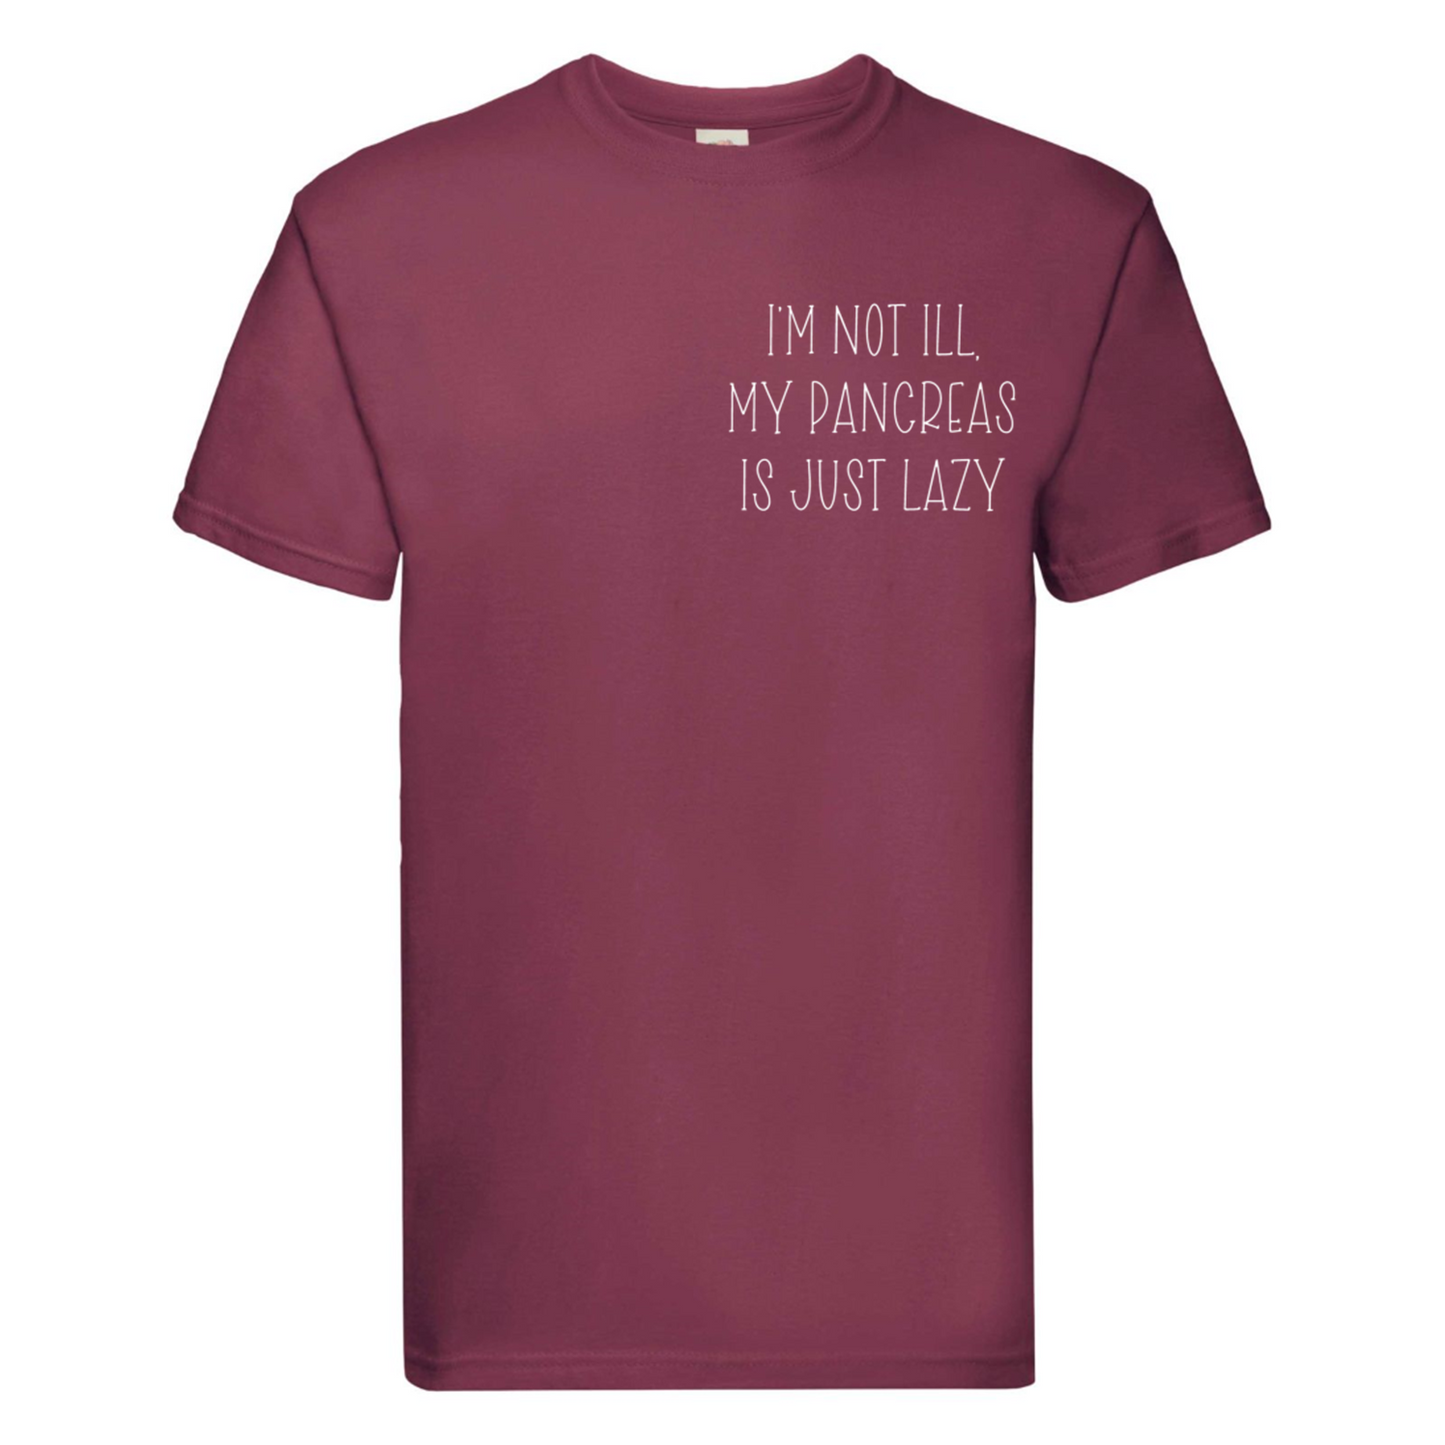 I'm Not Ill, My Pancreas Is Just Lazy T Shirt